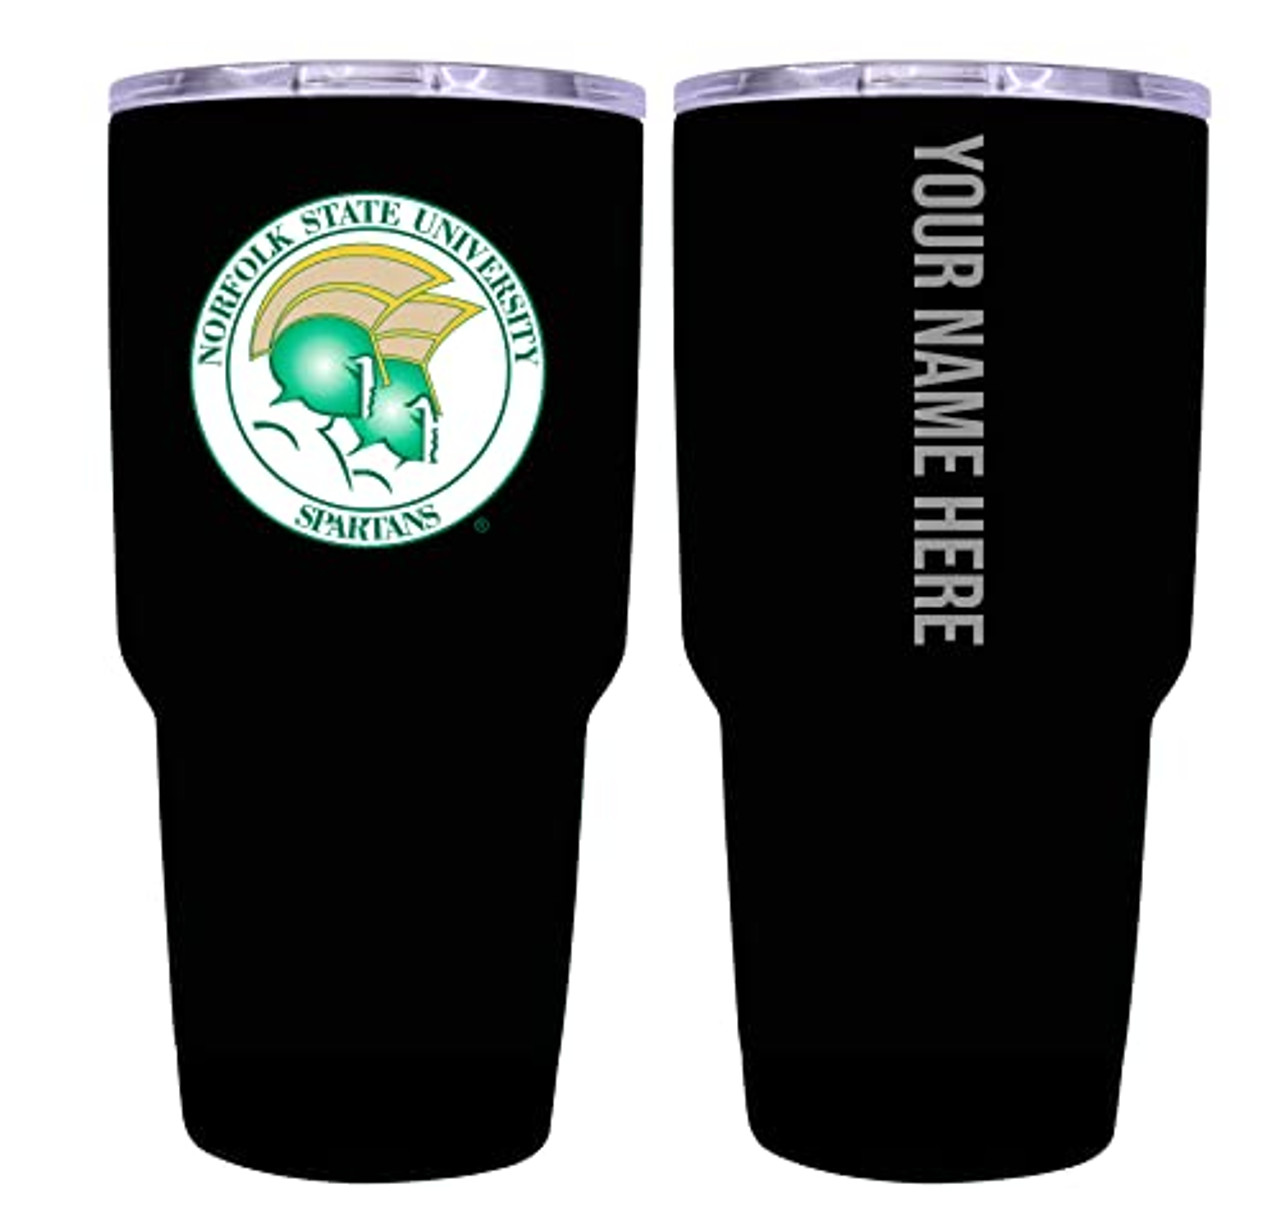 Collegiate Custom Personalized Norfolk State University, 24 oz Insulated Stainless Steel Tumbler with Engraved Name (Black)